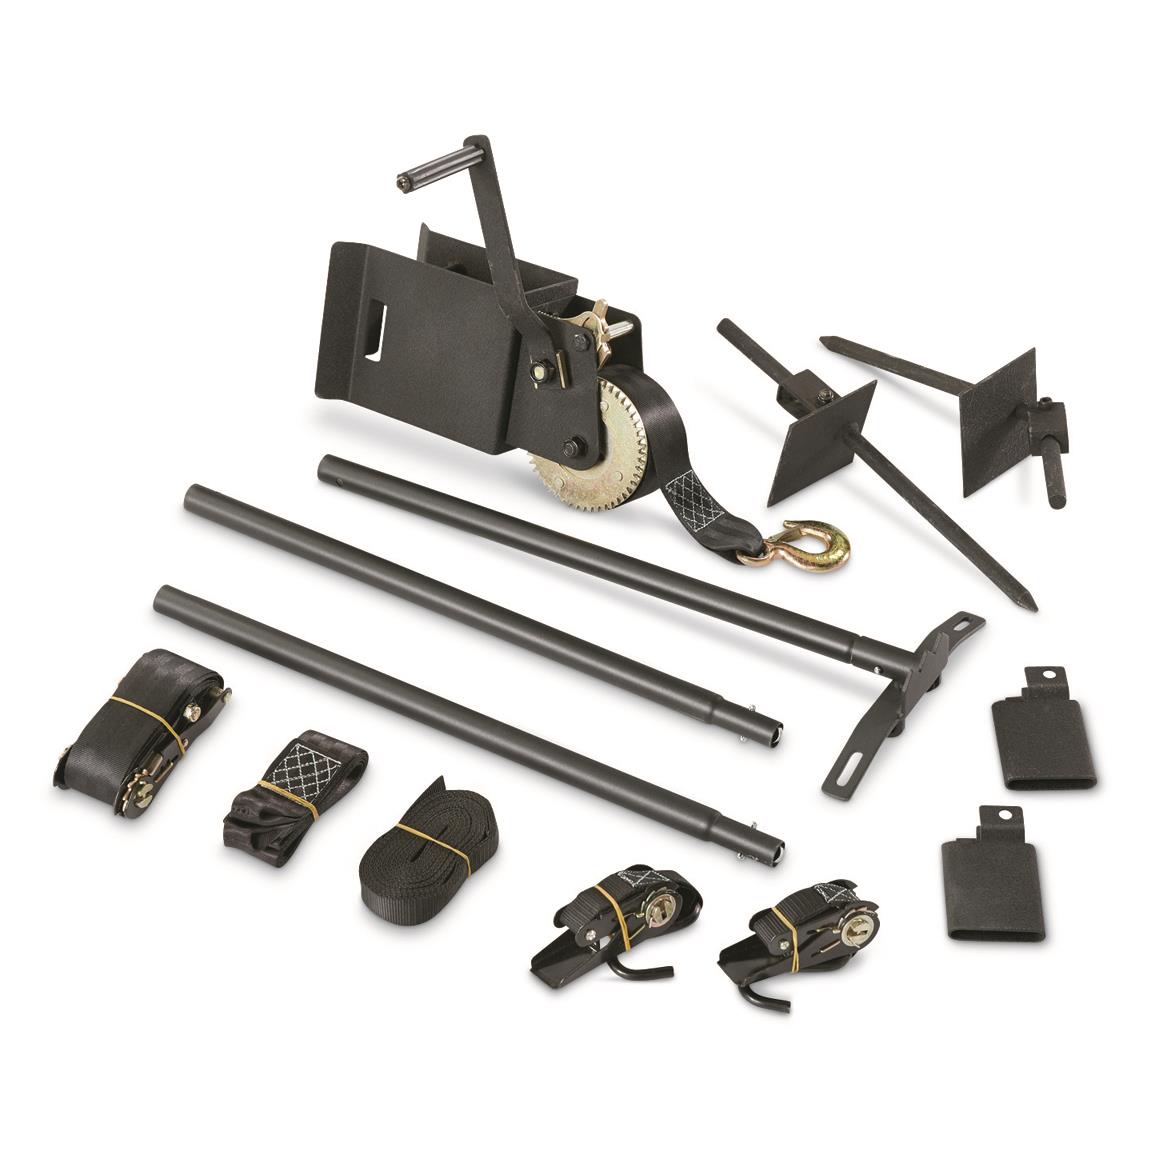 Guide Gear Ladder Tree Stand Installation Kit